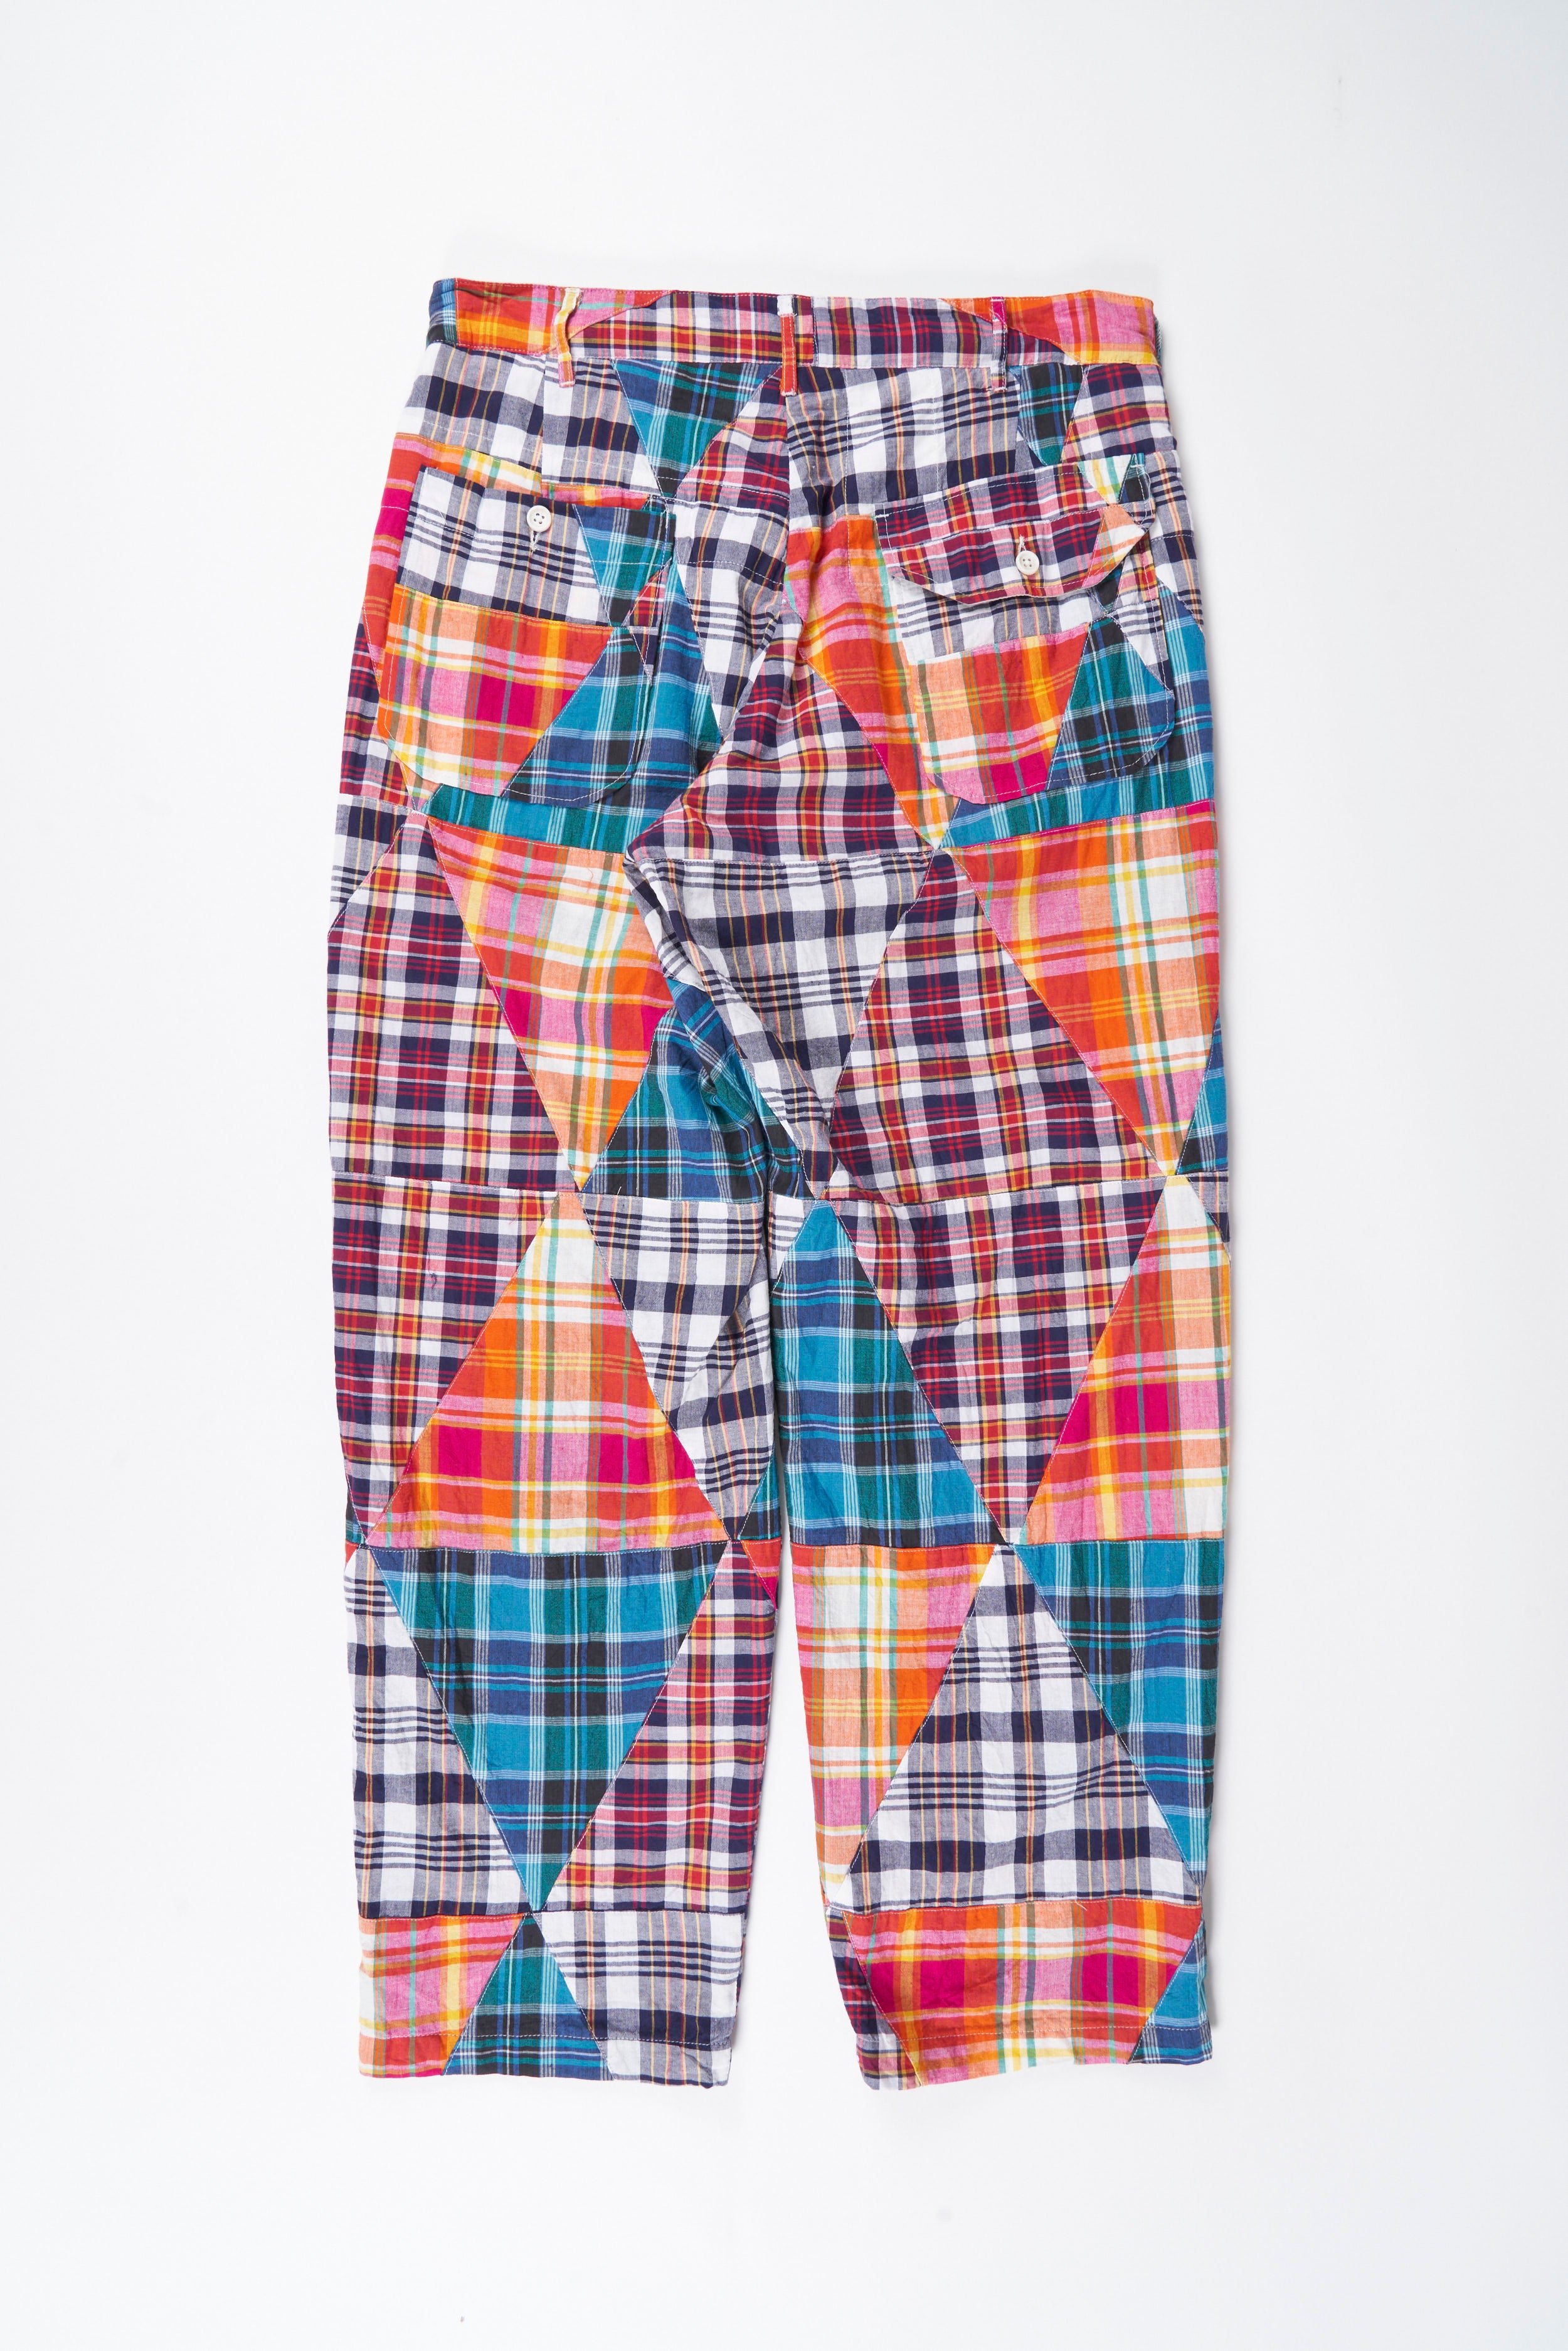 Engineered Garments Carlyle Pant - Multi Color Triangle Patchwork Madras